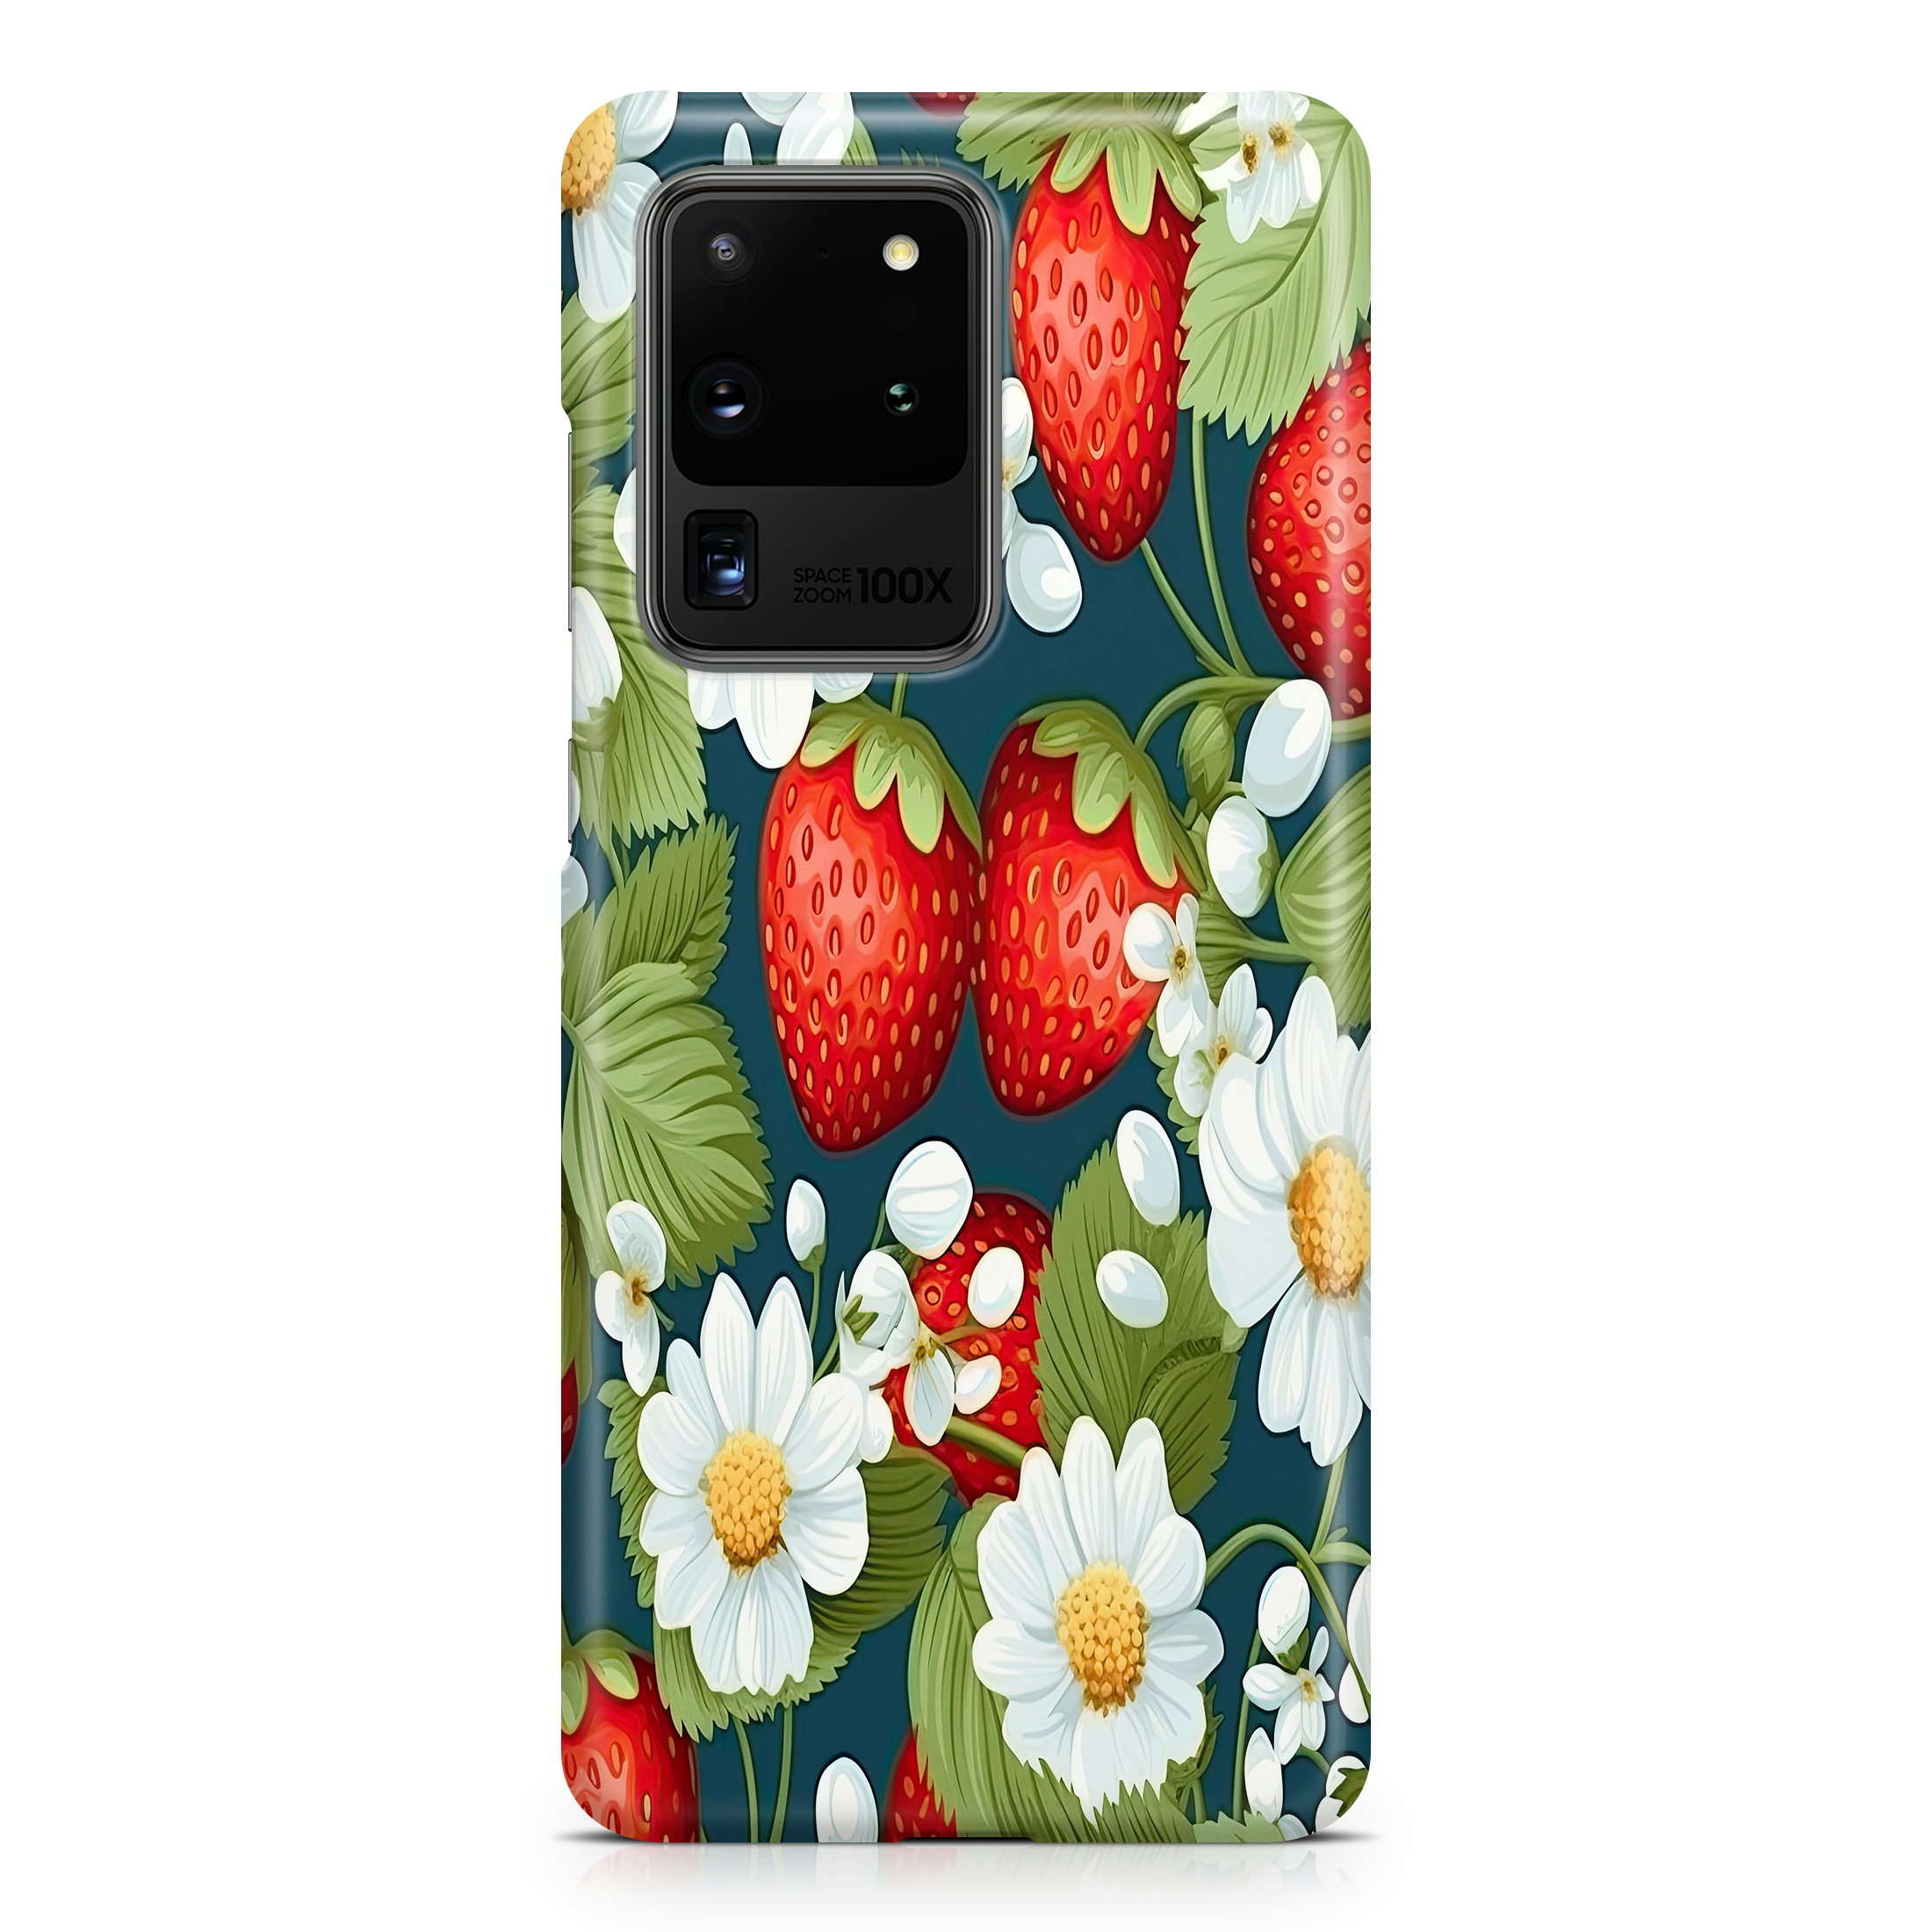 Strawberry Vine Oasis - Samsung phone case designs by CaseSwagger